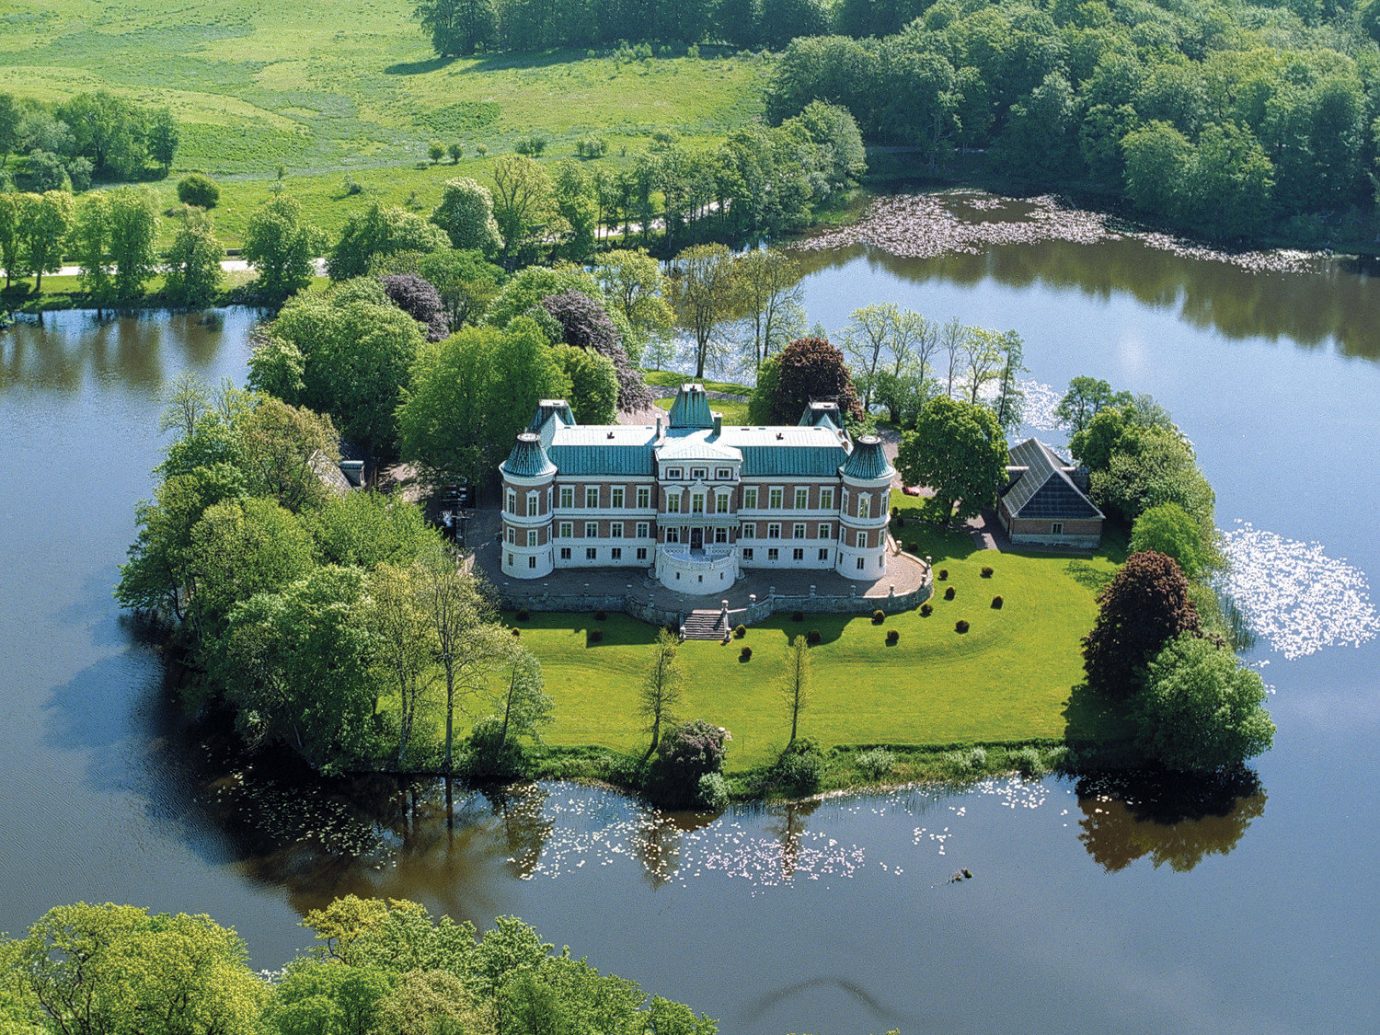 Hotels tree water outdoor aerial photography mountain River reflection Lake reservoir Nature loch vehicle fjord landscape rural area waterway pond wetland surrounded Garden shore lush